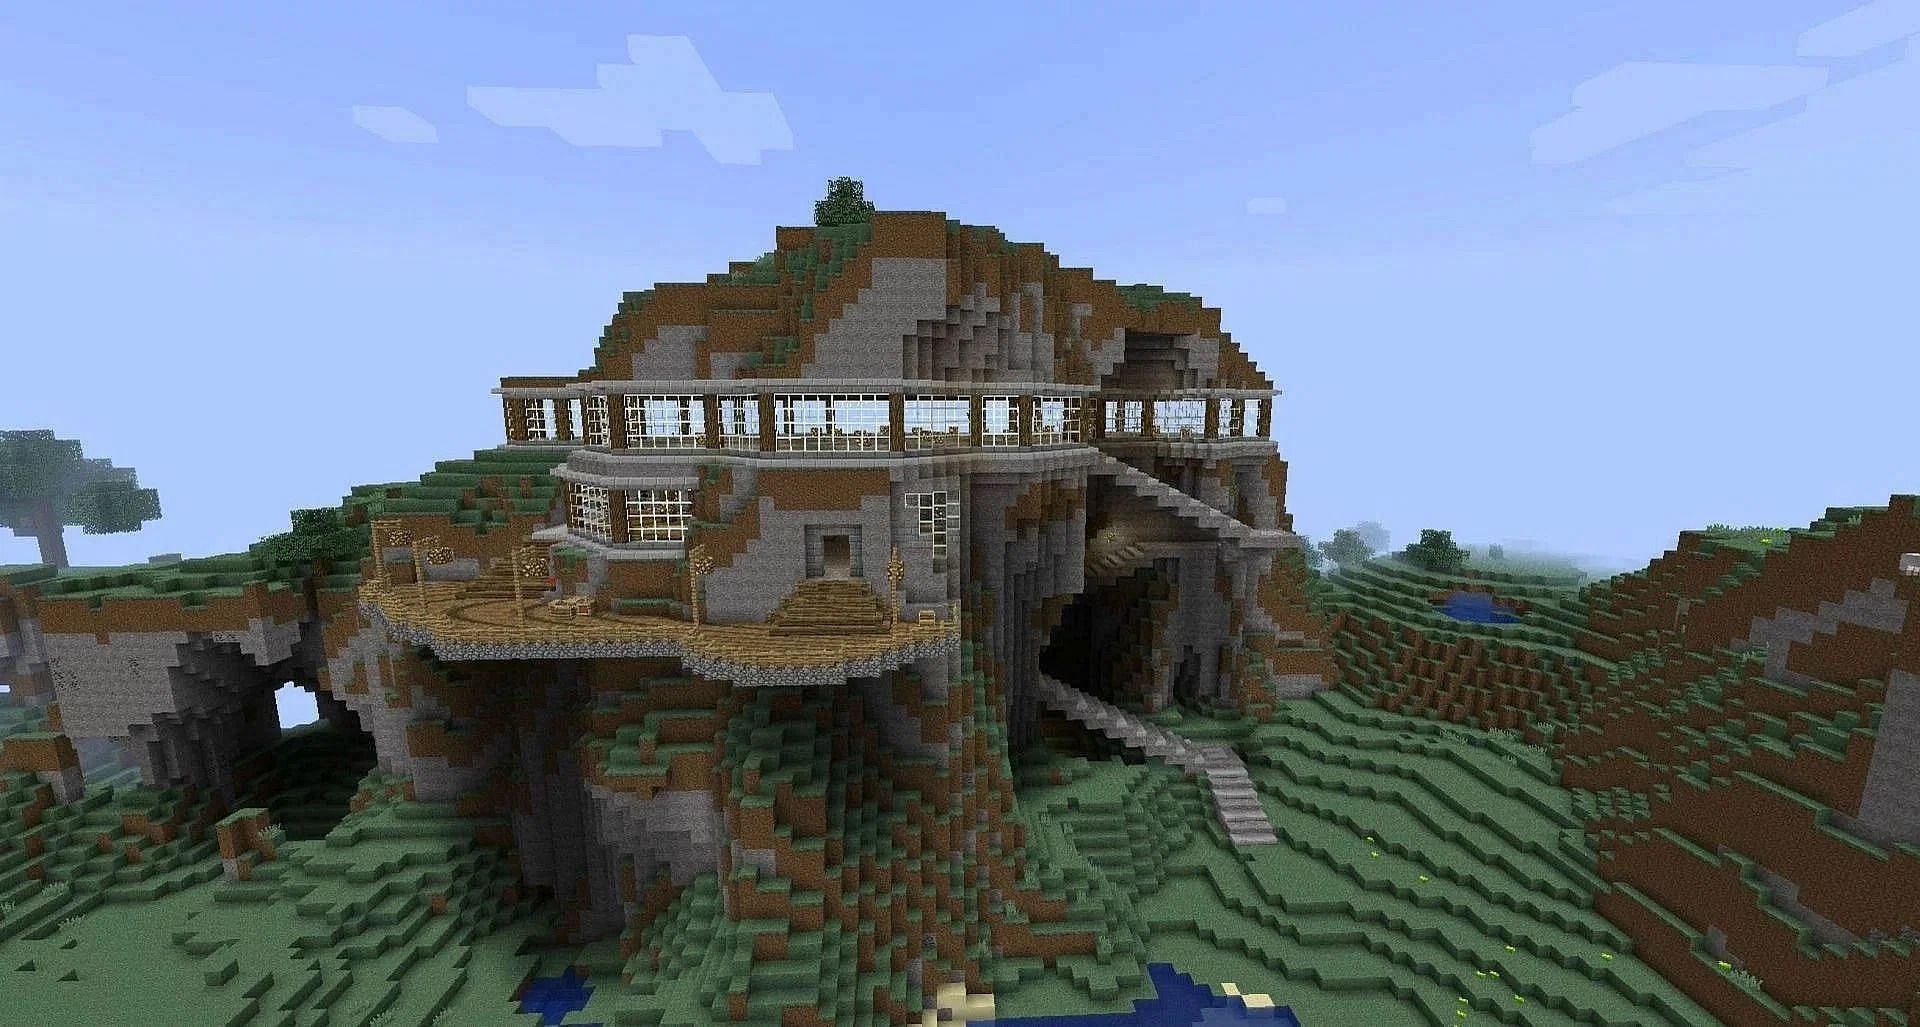 Mountain houses in Minecraft